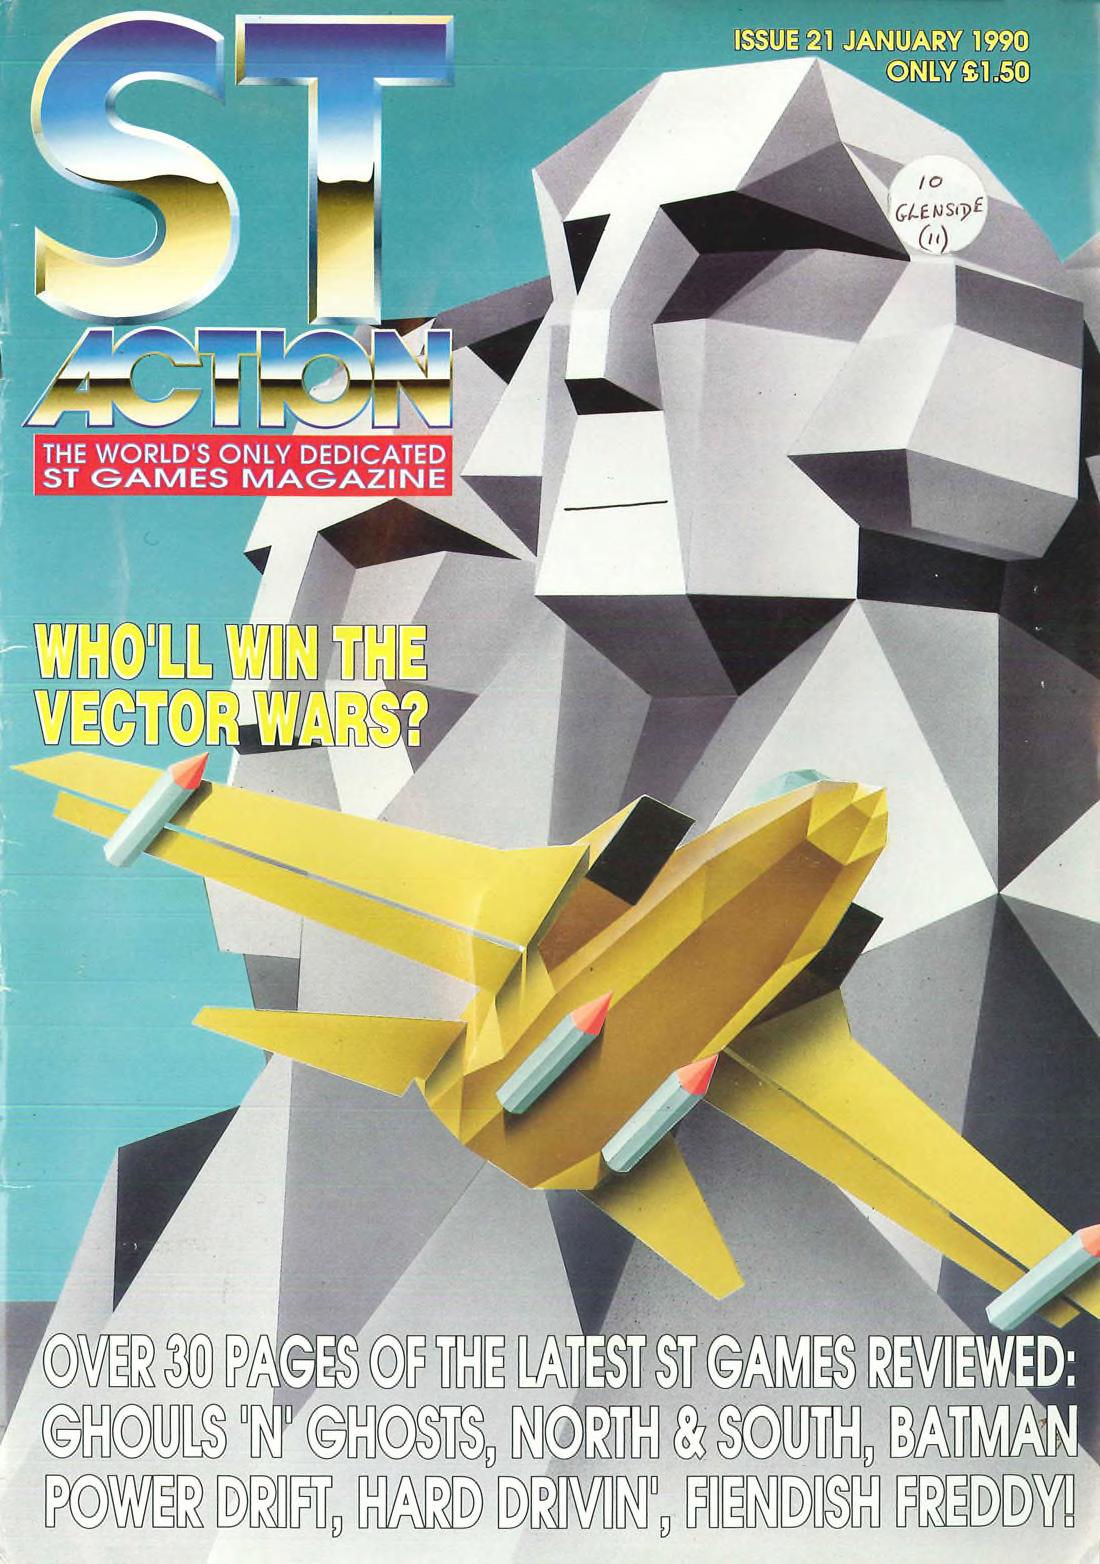 Cover for ST Action 21 (Jan 1990)